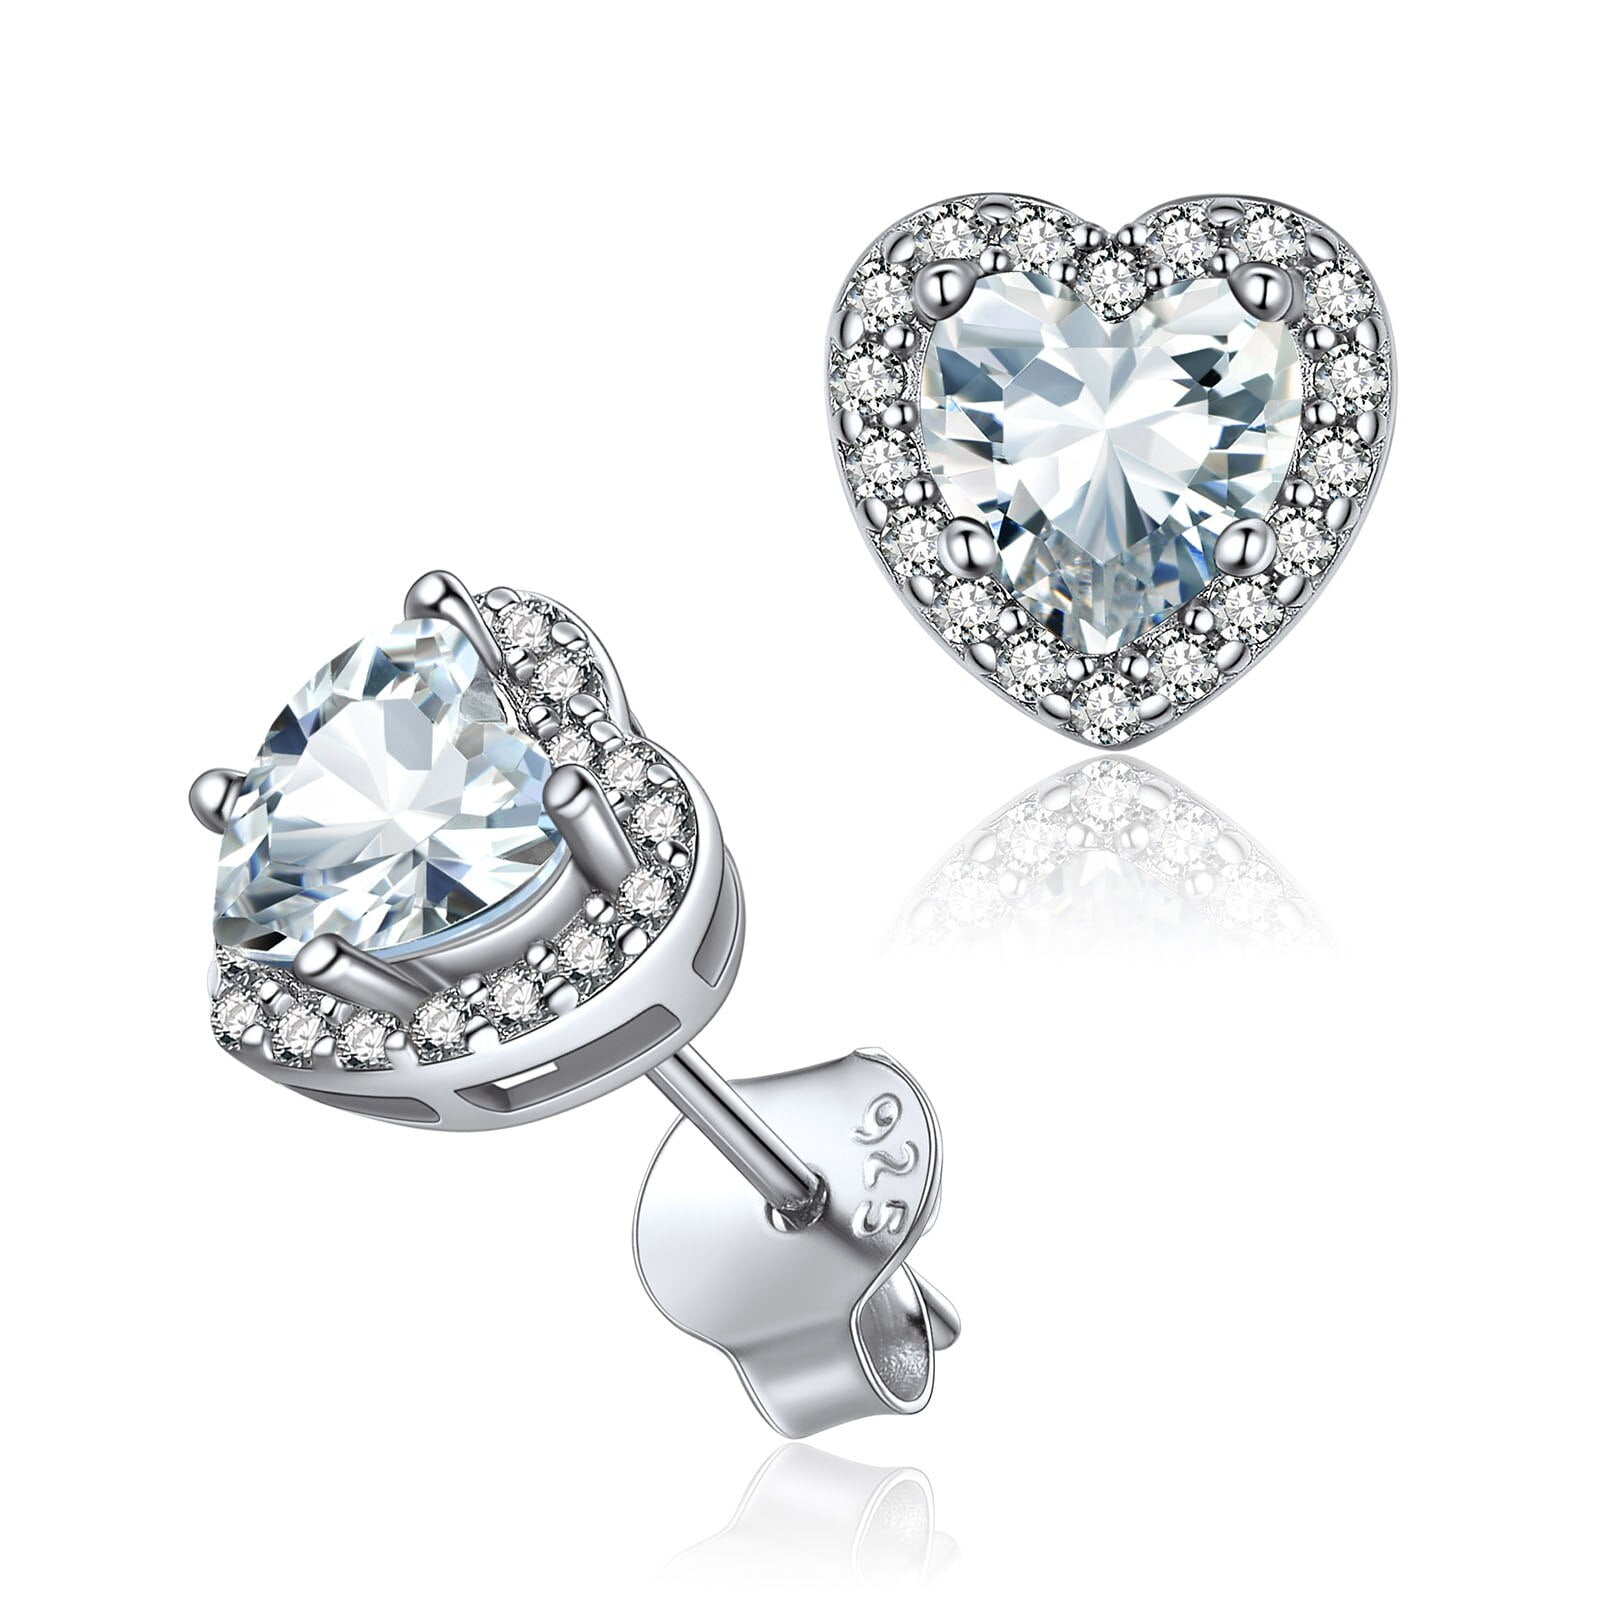 Halo Heart Stud Earring in Sterling Silver with Simulated Birthstone and CZ